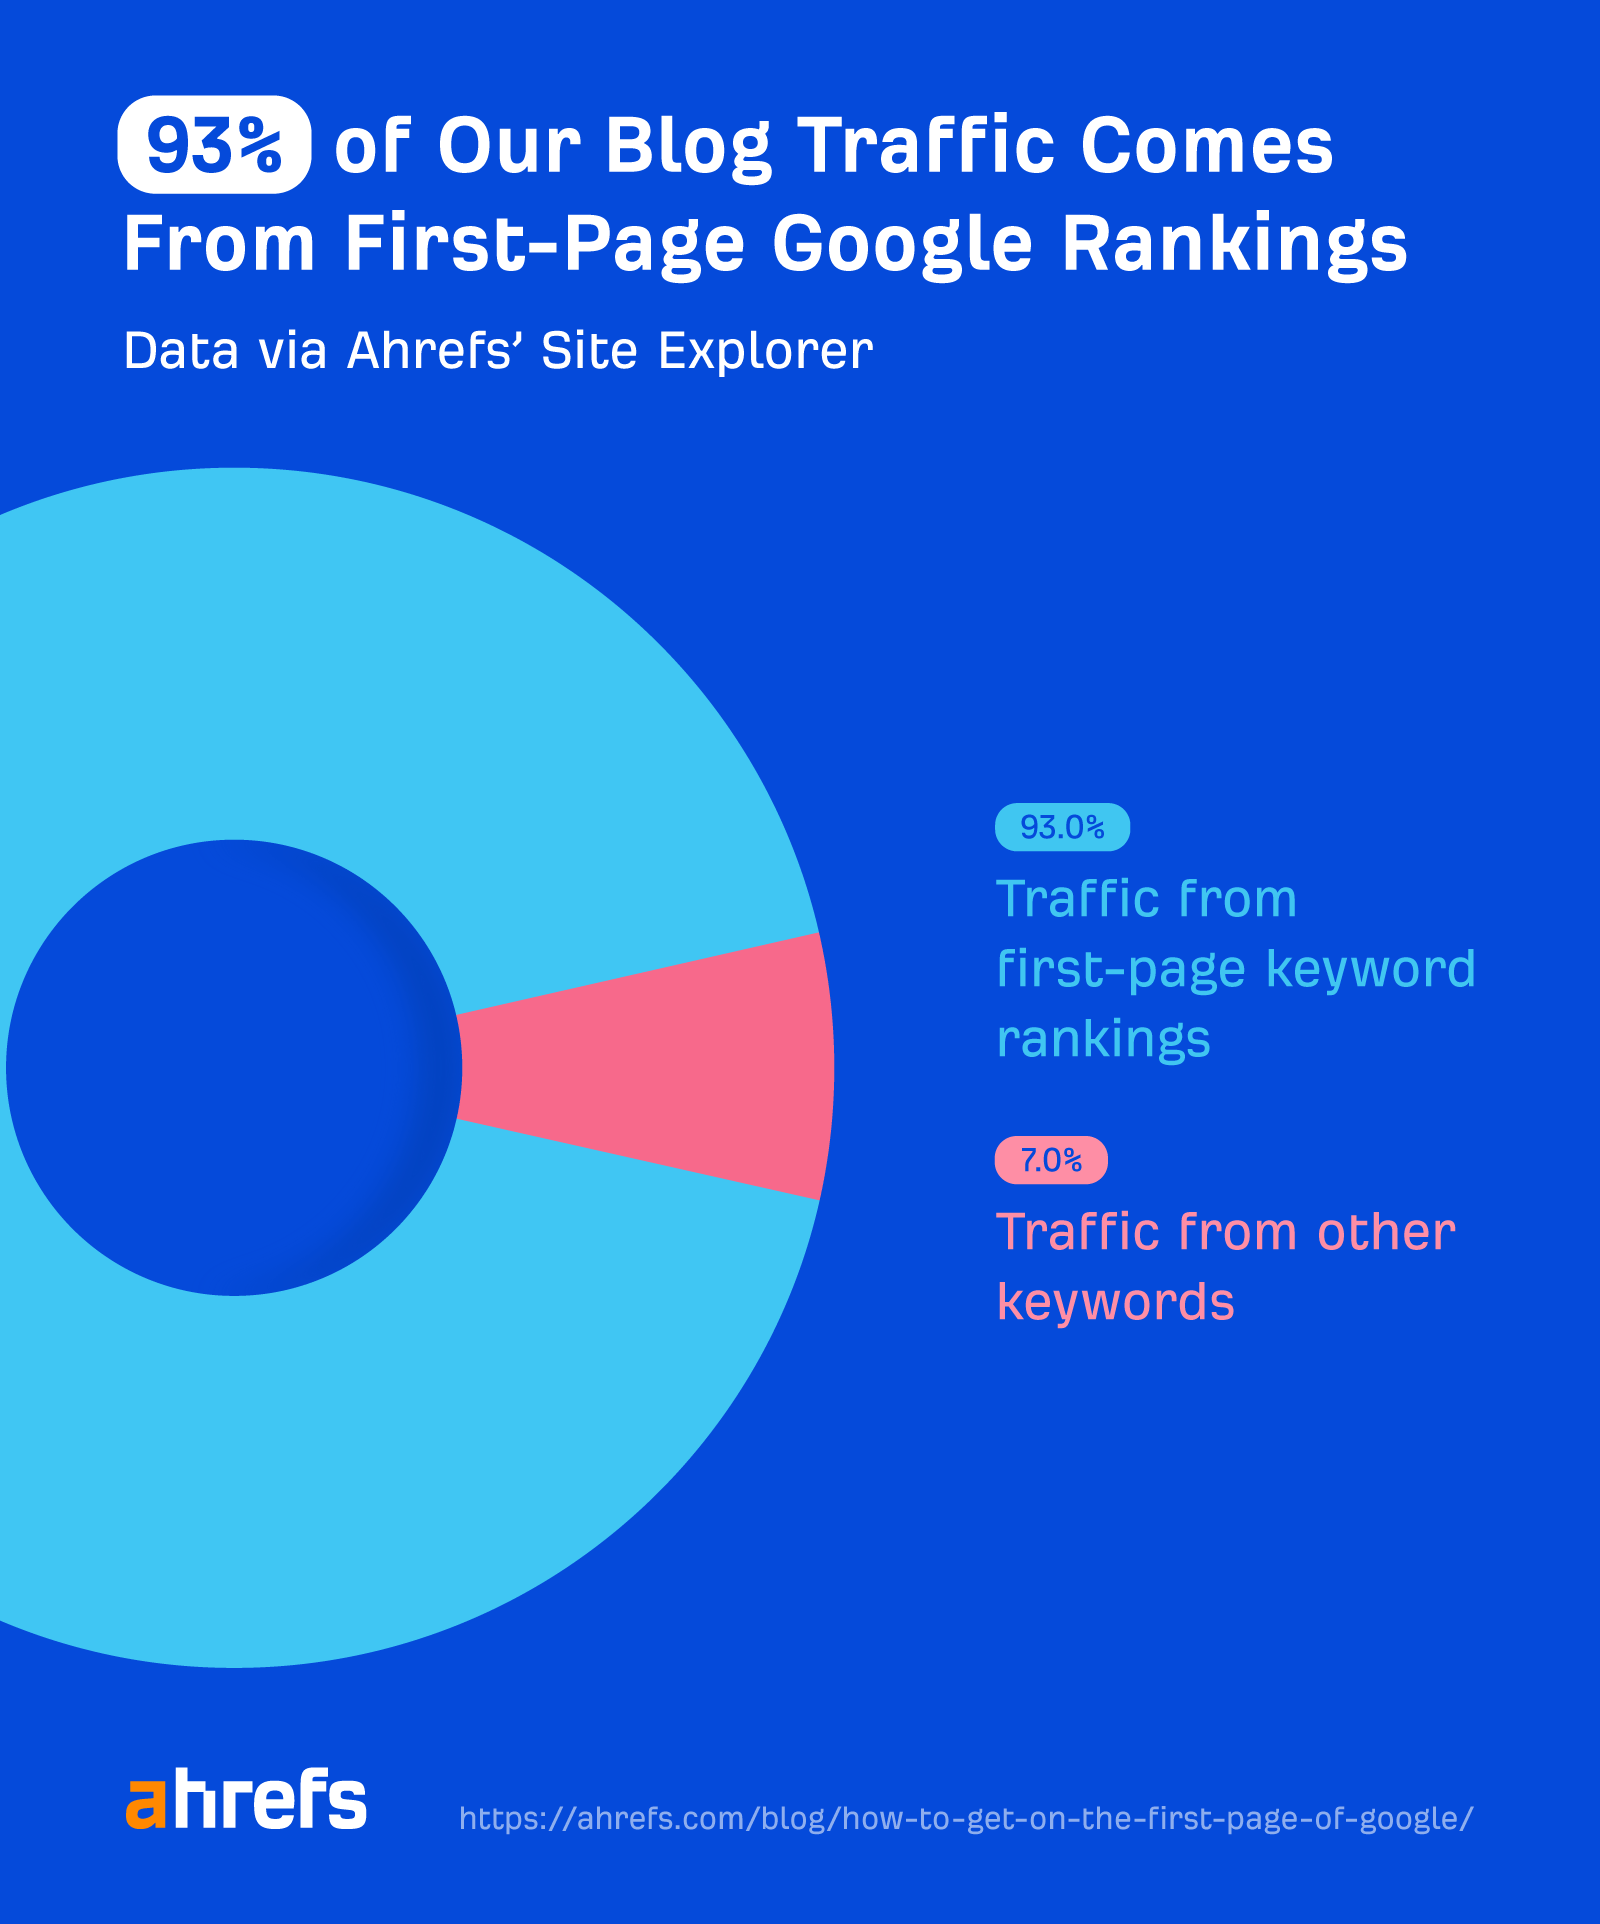 93% of our blog traffic comes from first-page Google rankings
